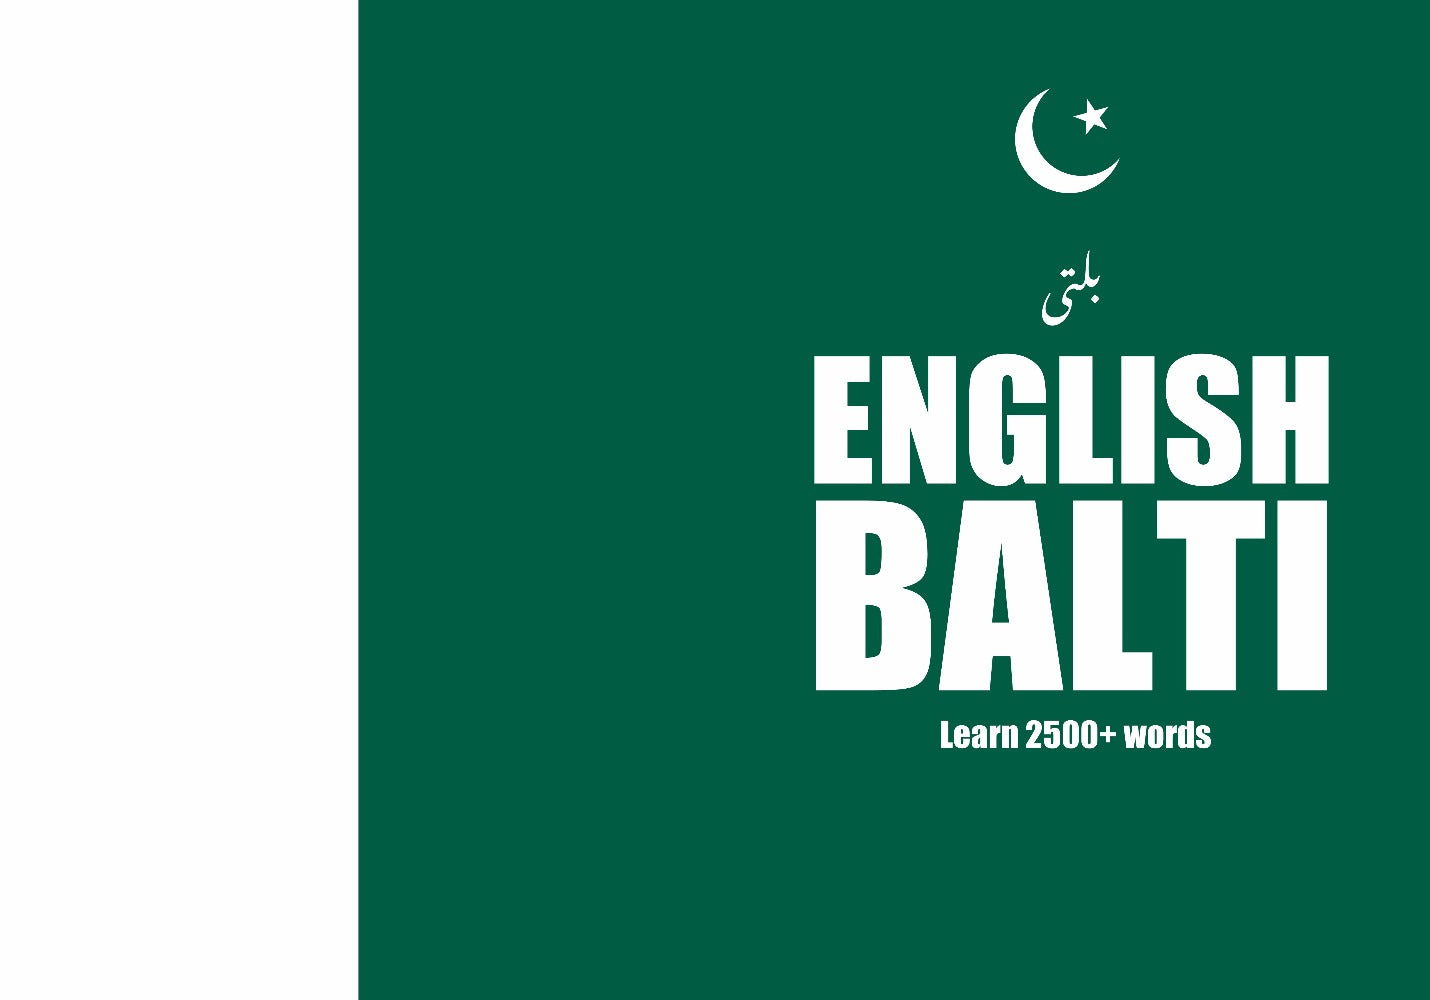 Balti language learning notebook cover